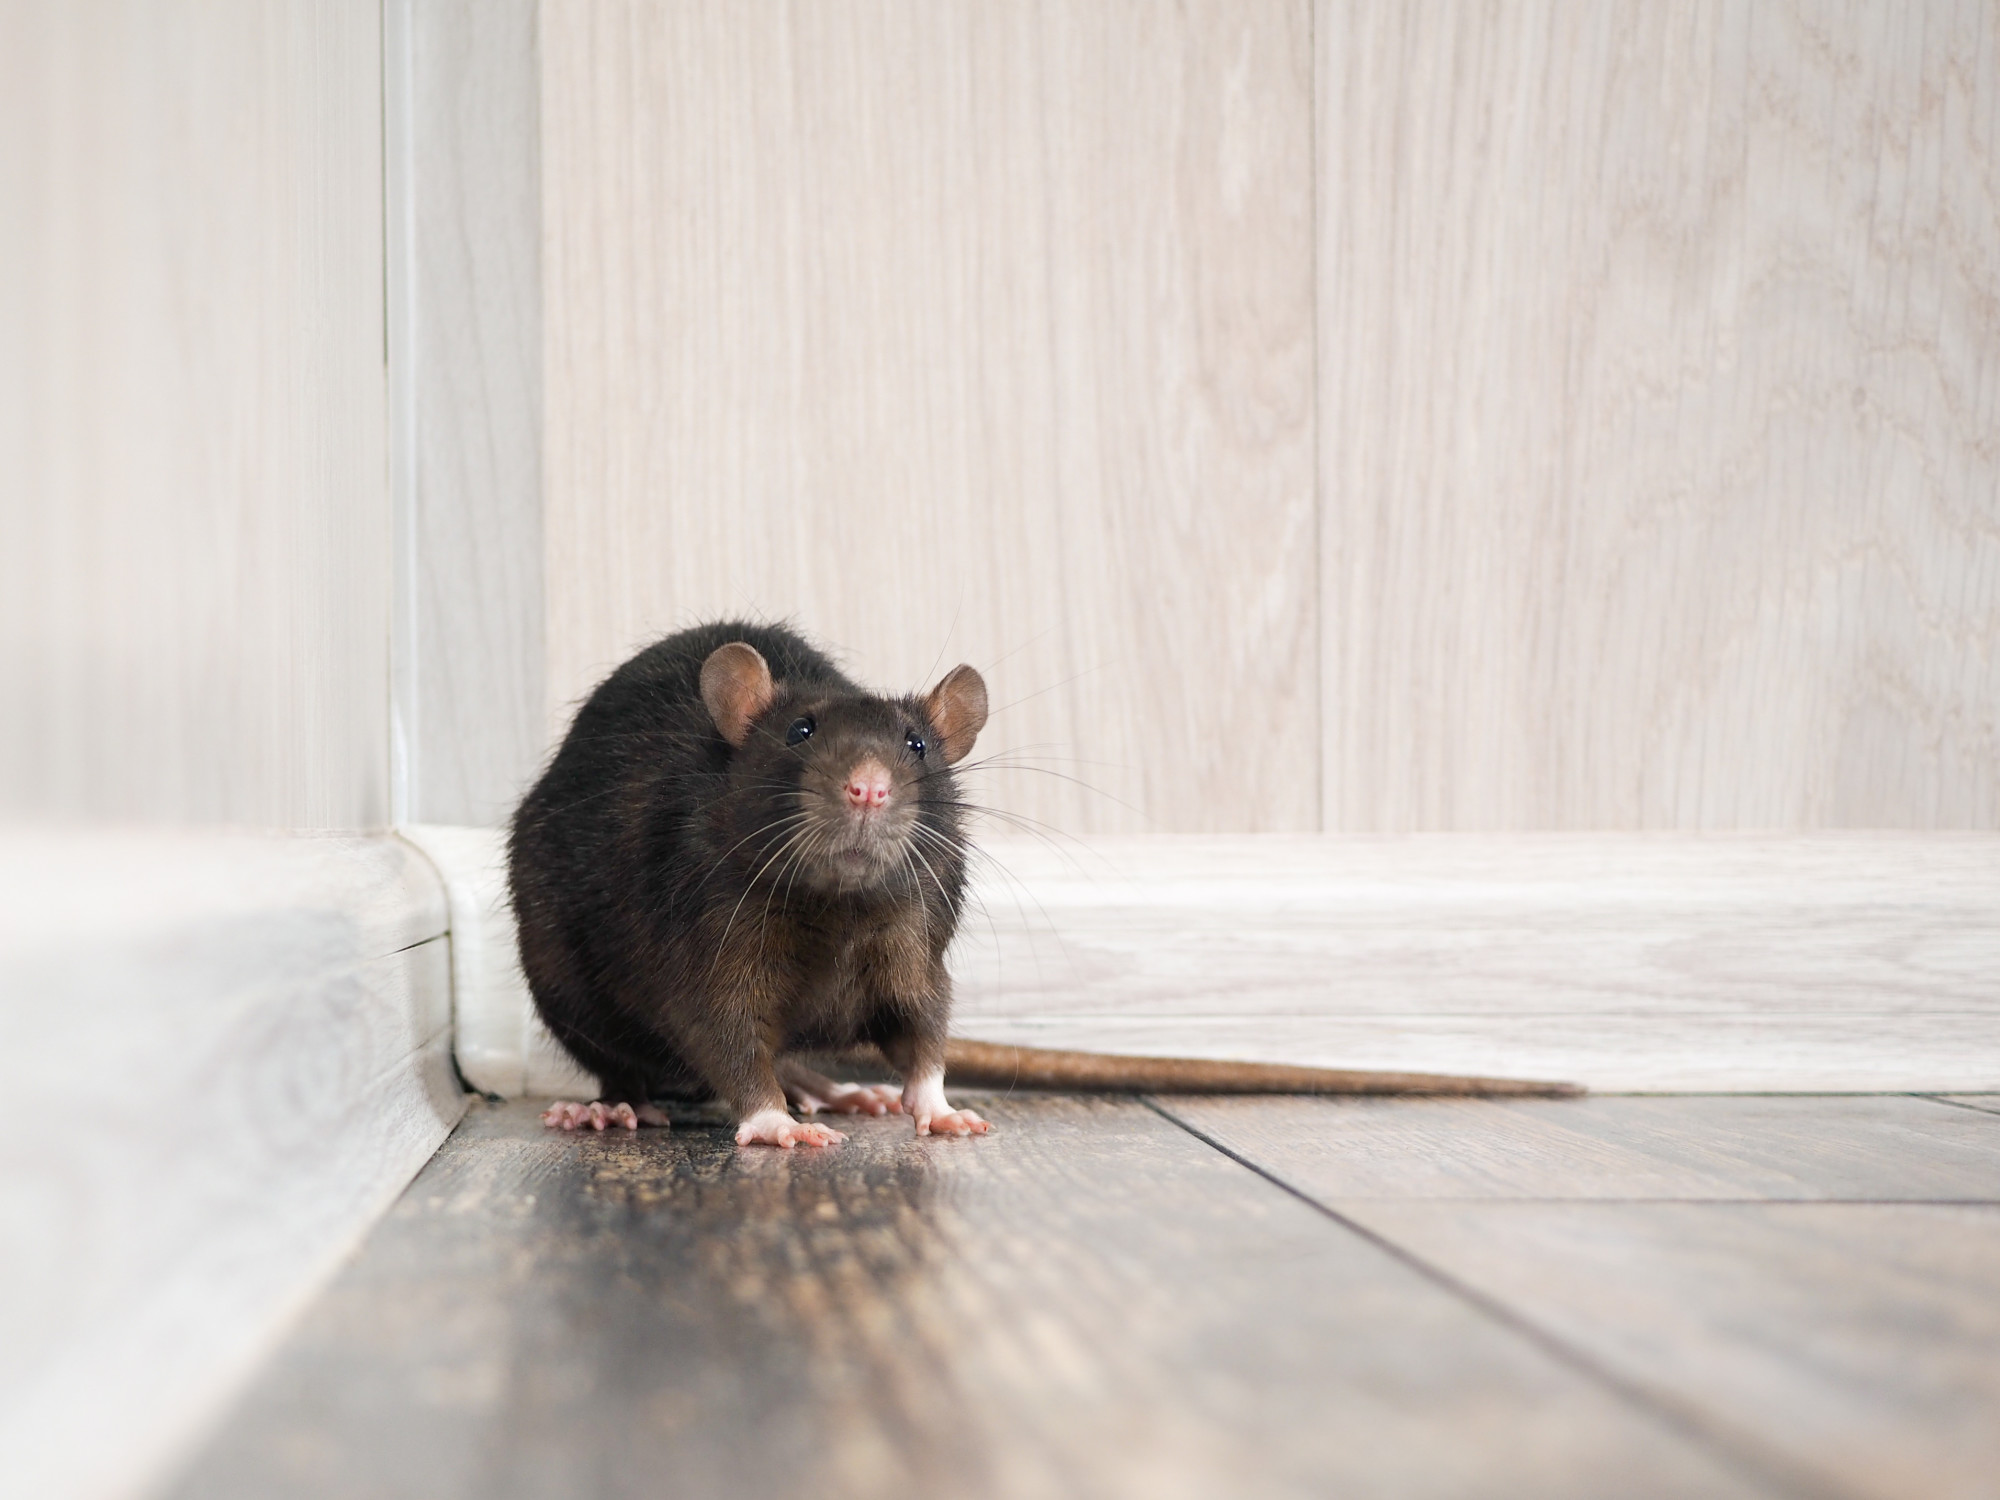 Nobody wants rats or mice around their house. Here are some of the warning signs that you have a rodent problem in your home.